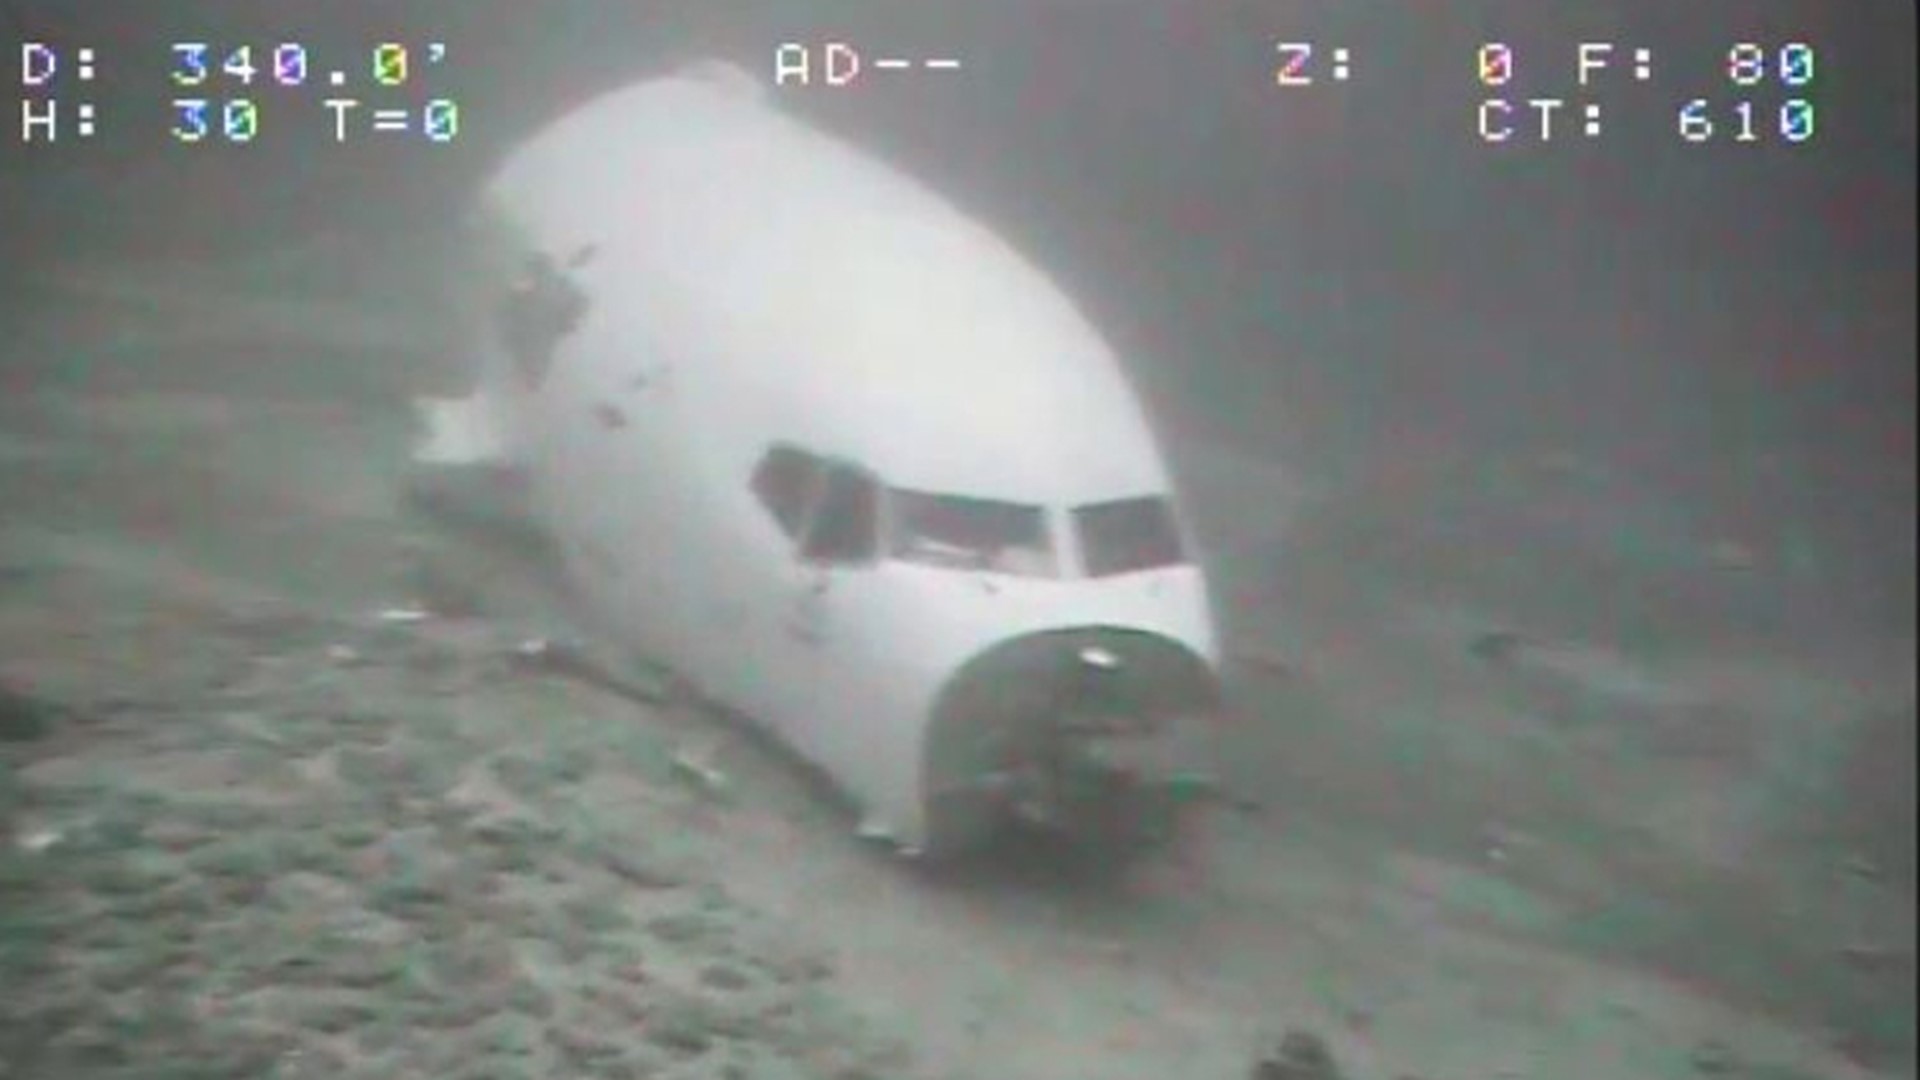 The wreckage of a Boeing 737 cargo plane that crashed in Oahu over the summer has been recovered.